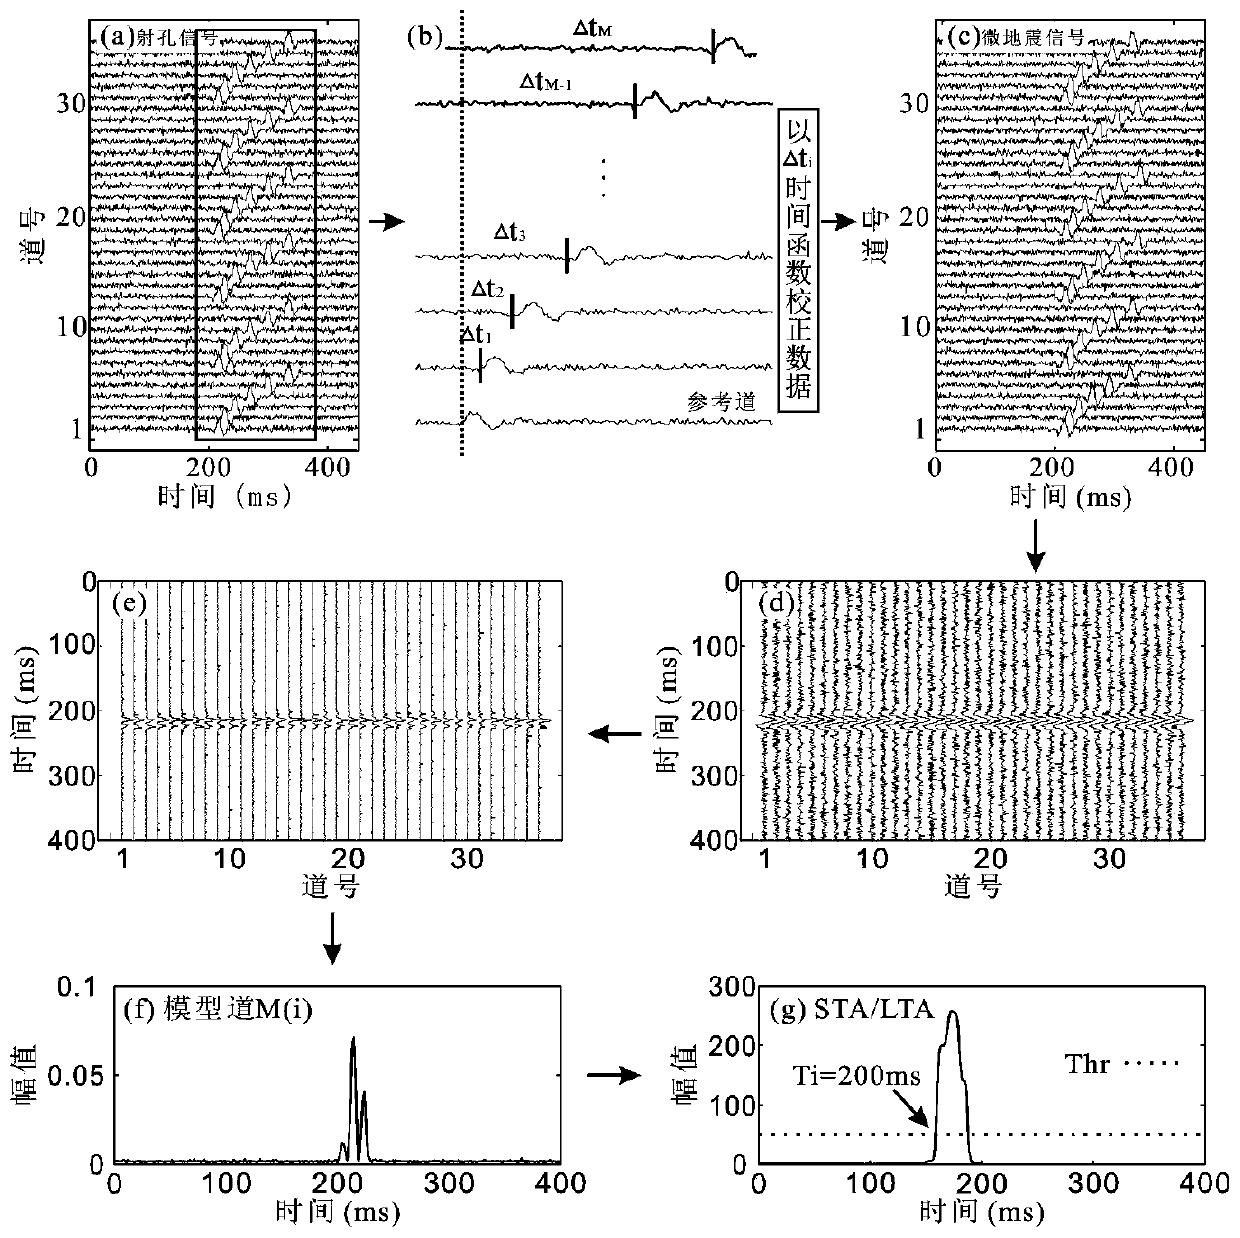 An automatic identification method for microseismic events based on inter-trace energy superposition